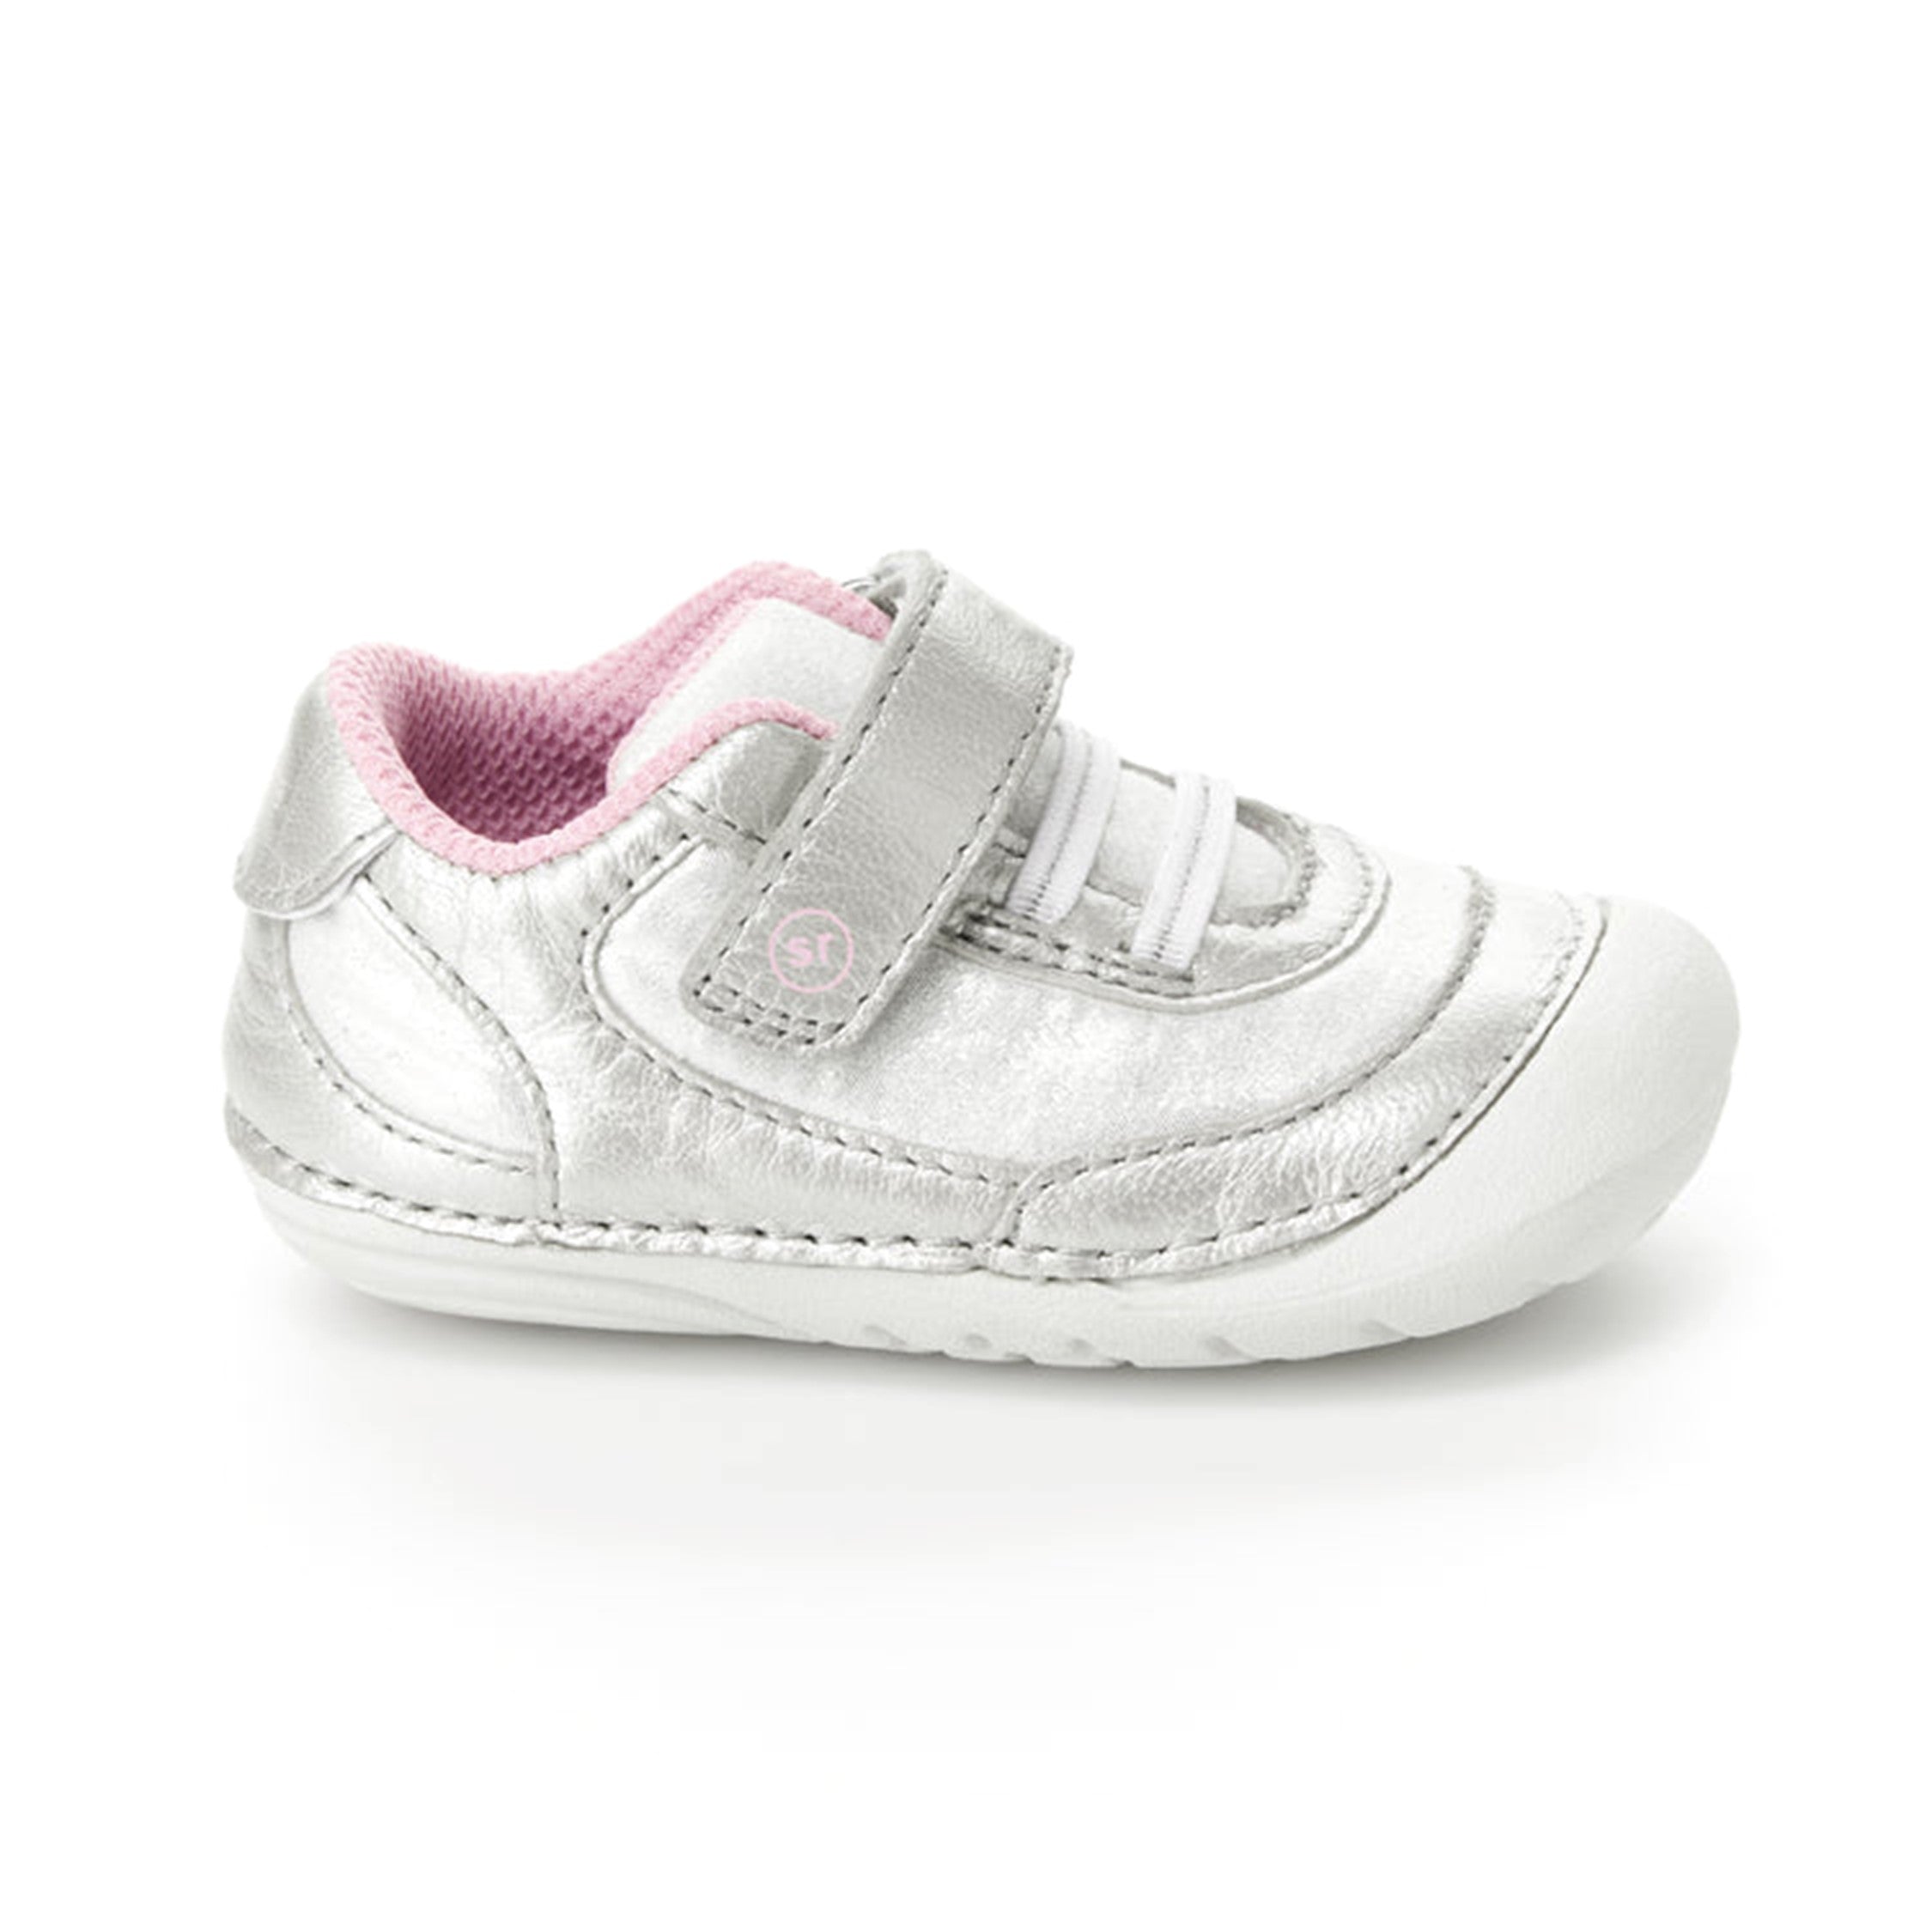 Soft Motion Jazzy (First Walking) Sneaker - Champagne